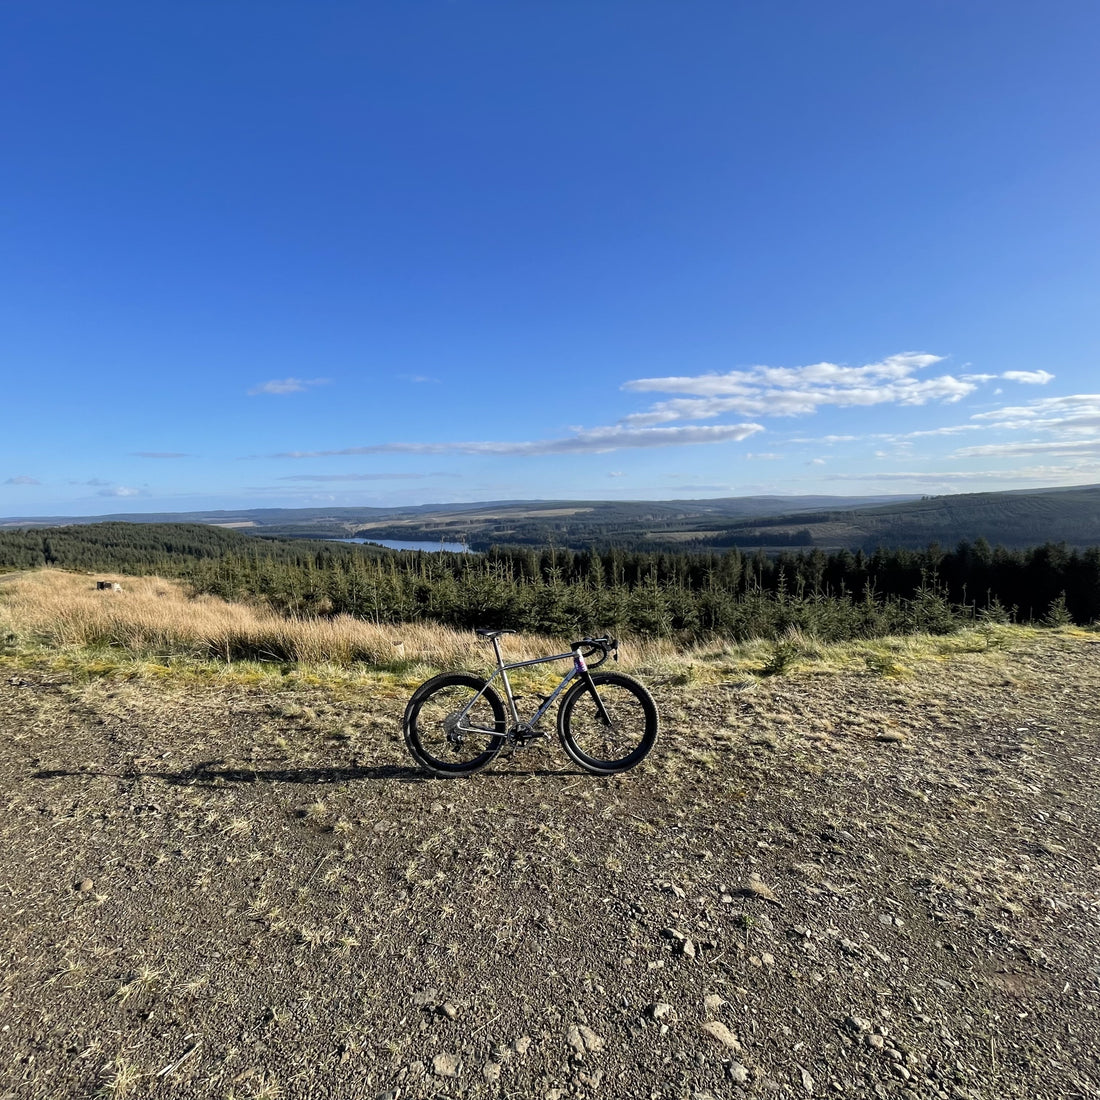 A bike in a deserted landscape on gravel path with blue sky and lake in the distance.